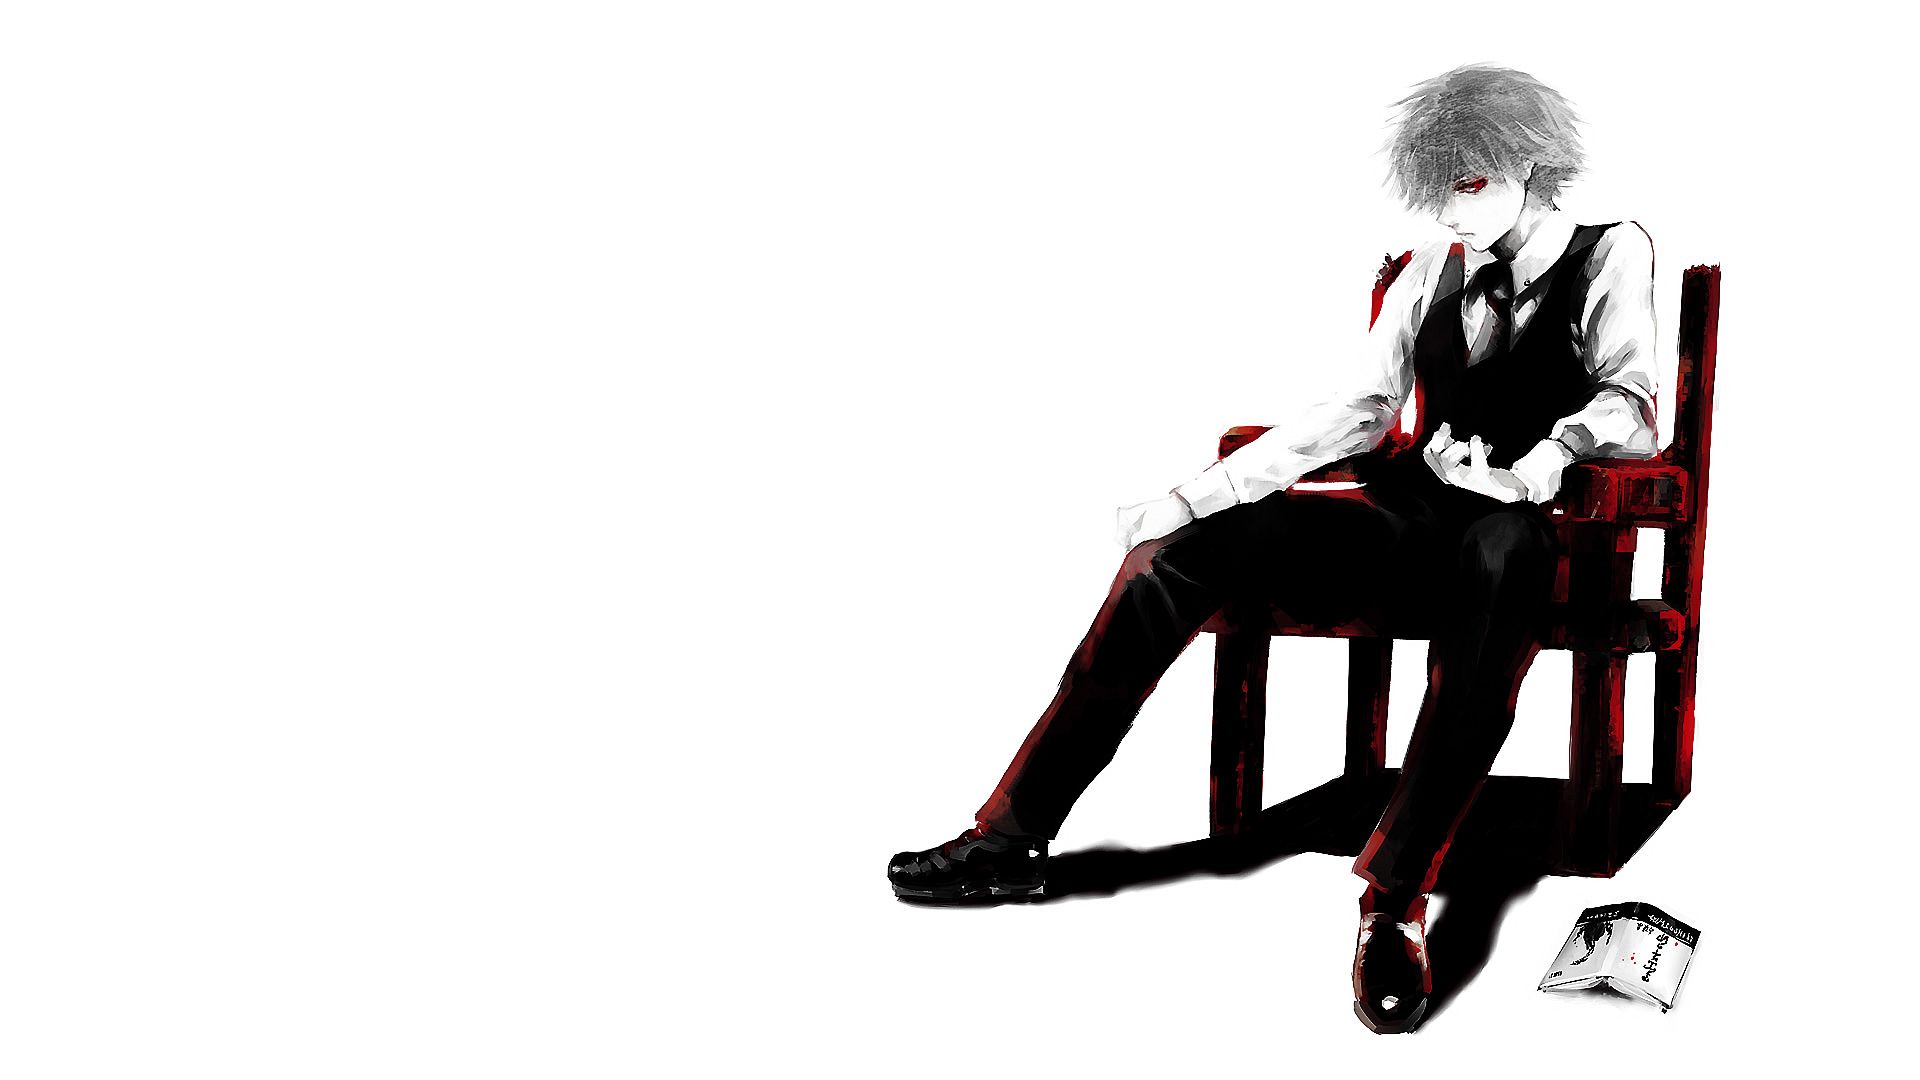 Download wallpaper from anime Tokyo Ghoul with tags: White, Ken